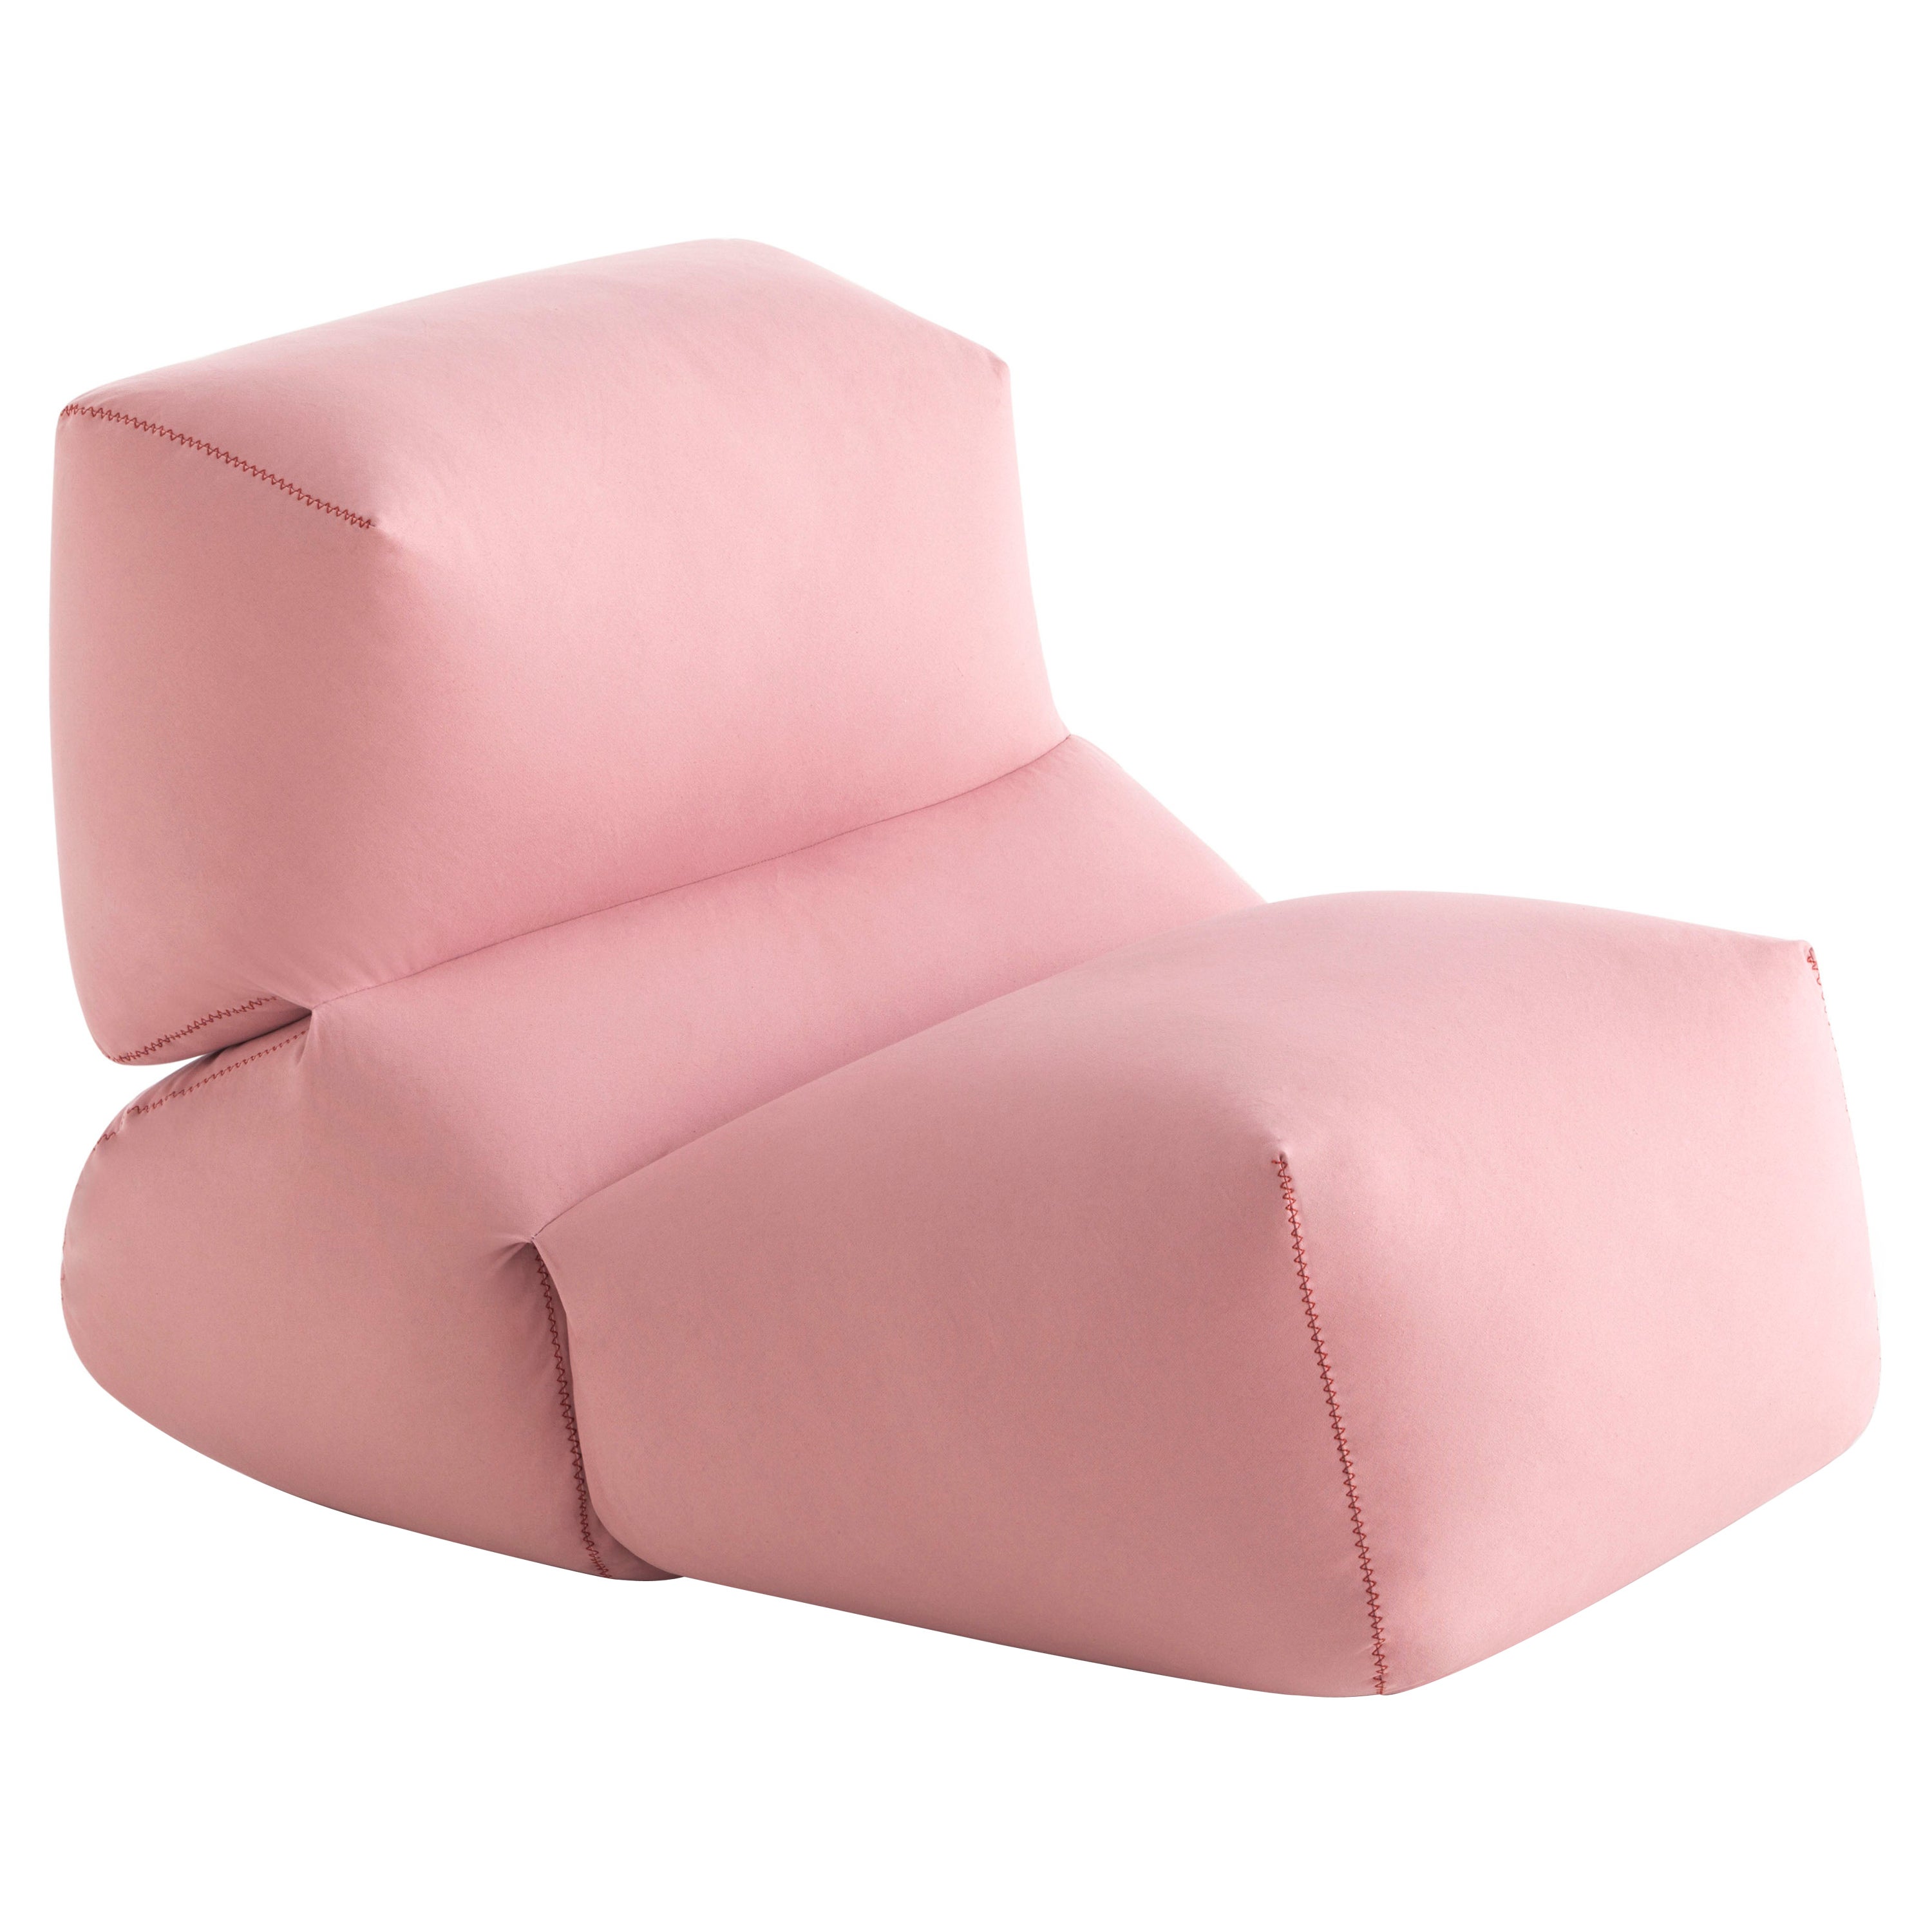 GAN Rugs Grapy Soft Seat Cotton Lounge Chair in Pink by Kensaku Oshiro For Sale